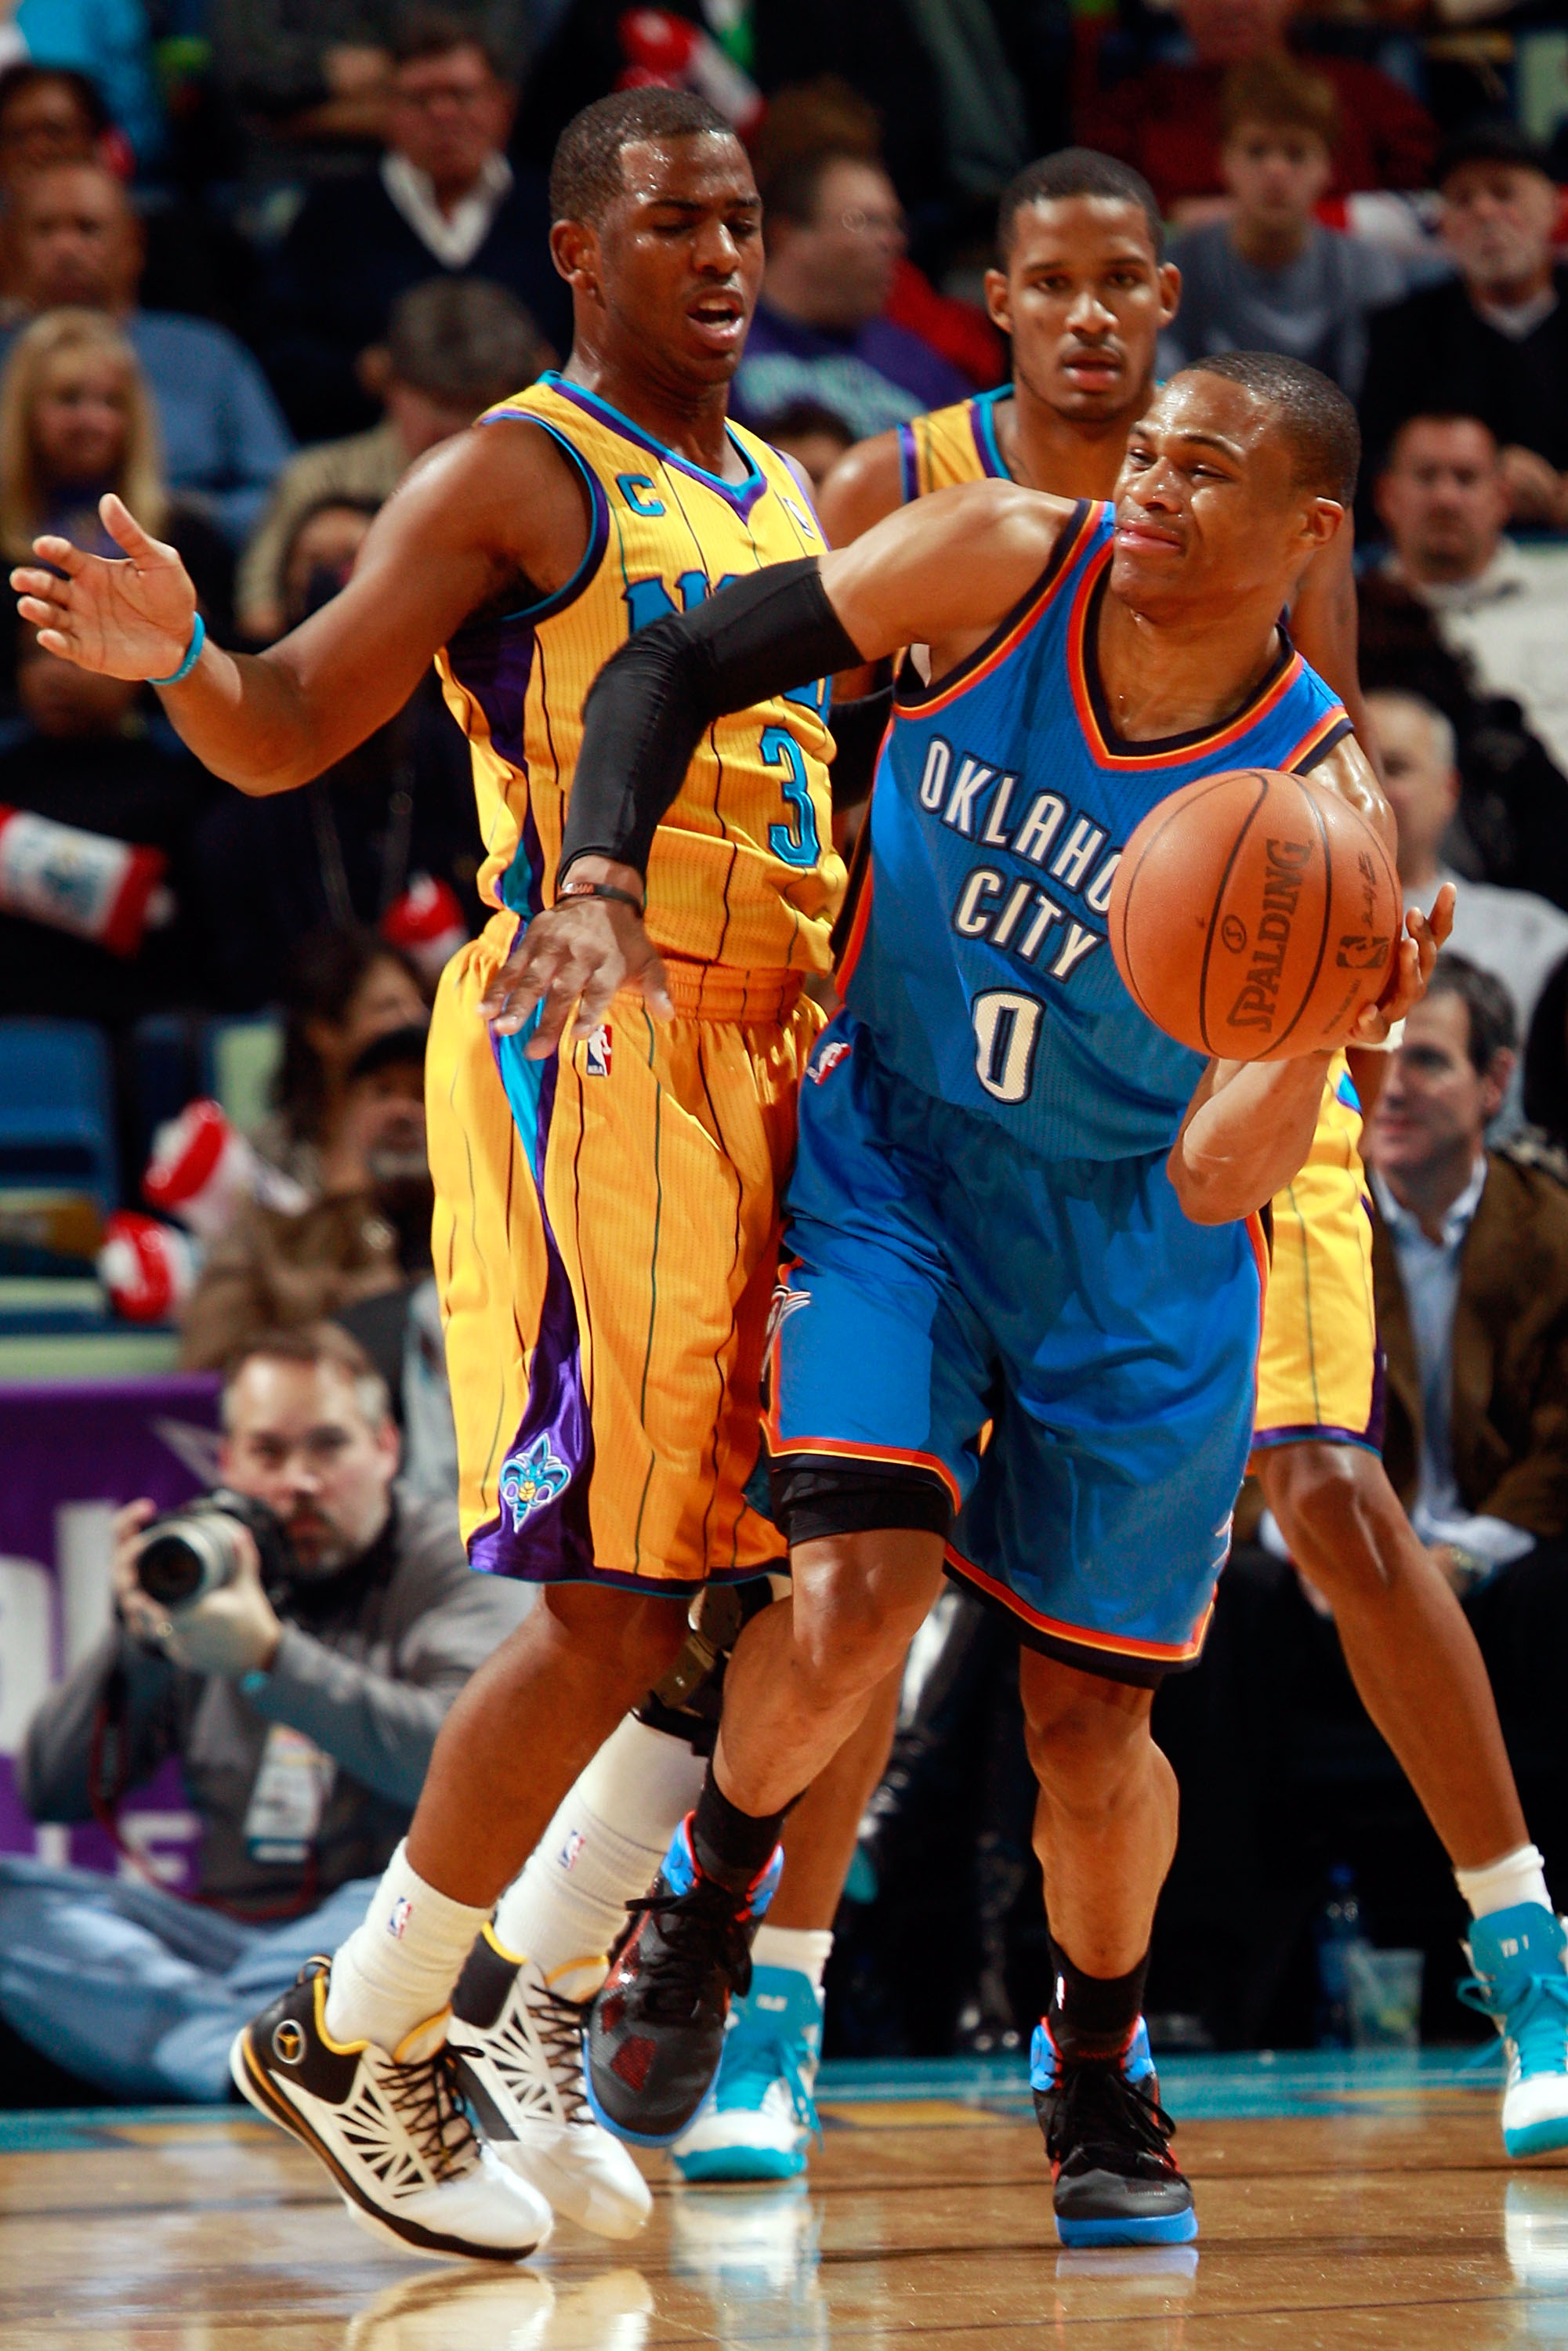 NEW ORLEANS, LA - DECEMBER 10:  Russell Westbrook #0 of the Oklahoma City Thunder passes the ball around Chris Paul #3 of the New Orleans Hornets  at New Orleans Arena on December 10, 2010 in New Orleans, Louisiana.    The Thunder defeated the Hornets 97-